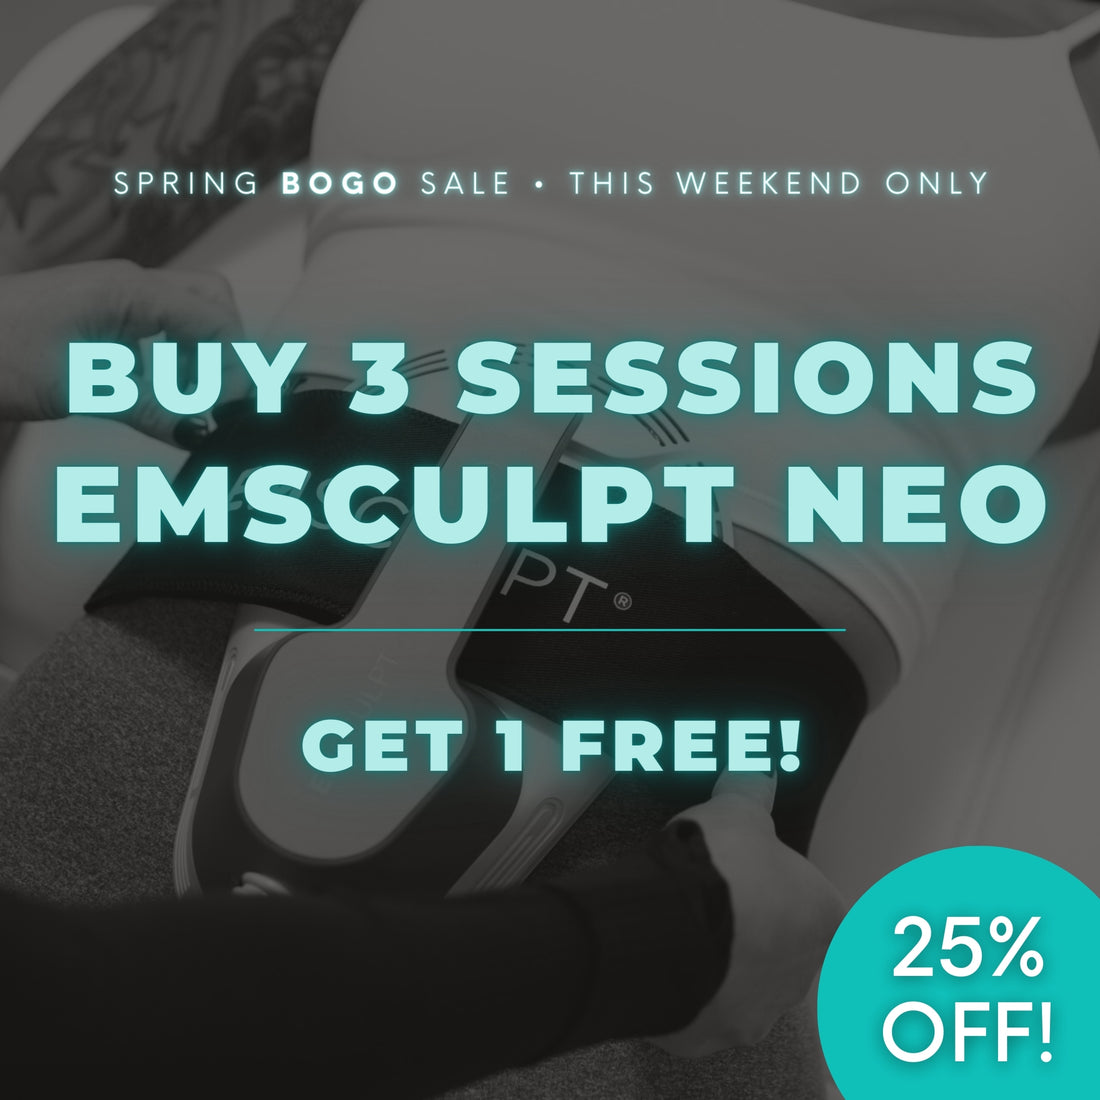 Emsculpt NEO | Buy 3 Sessions, Get 1 FREE